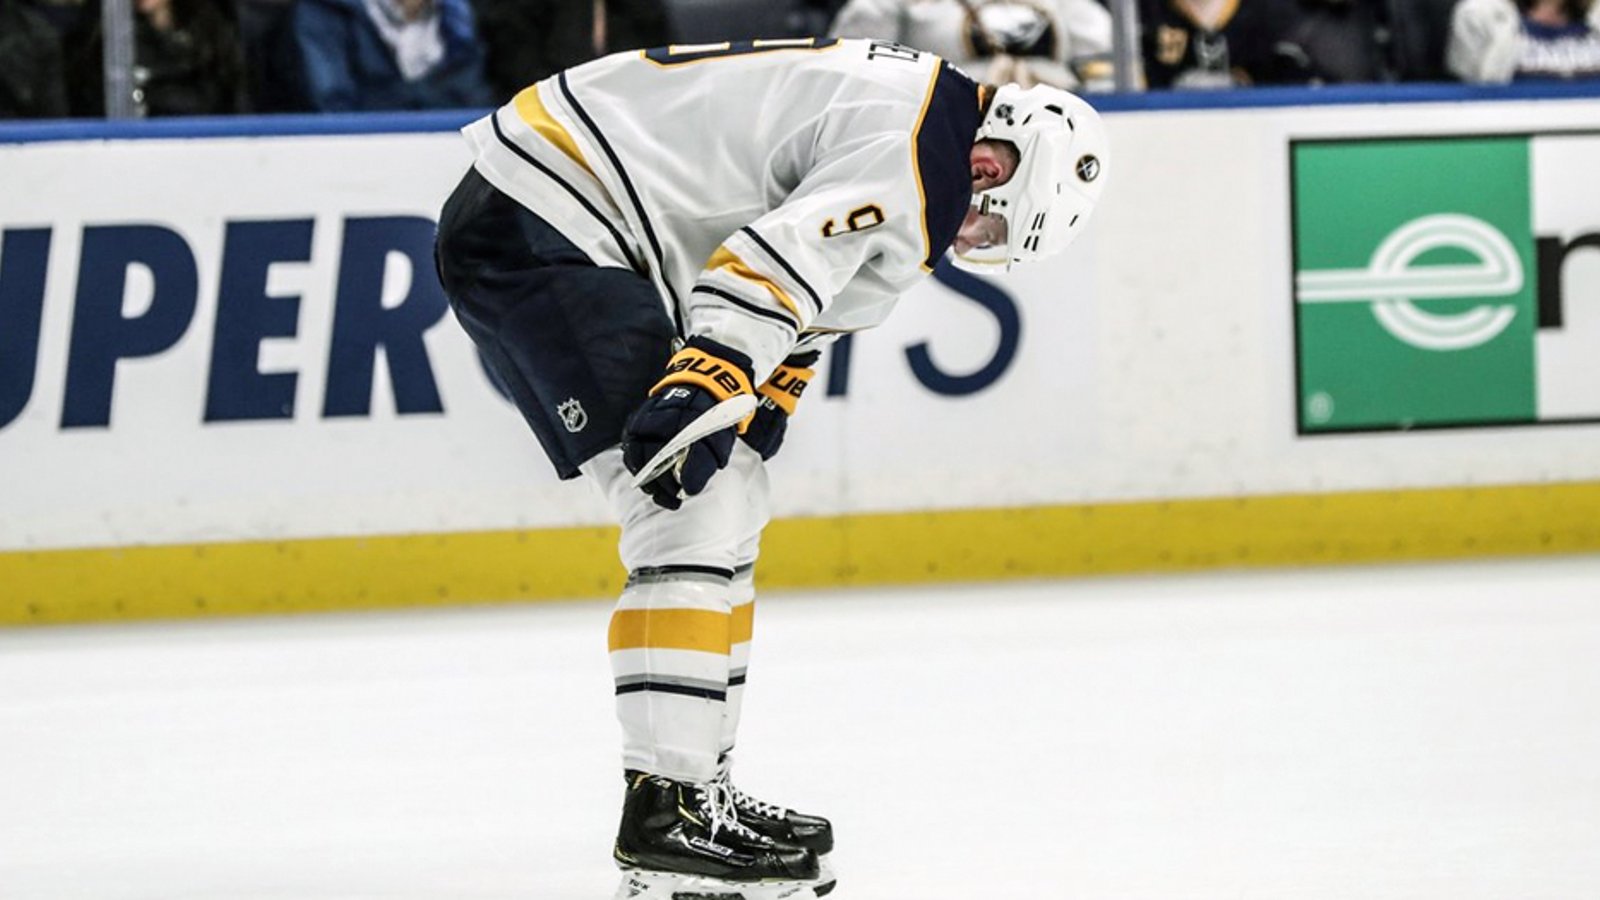 Eichel’s frustration boils over, says he’s “frustrated with the way things are going.”